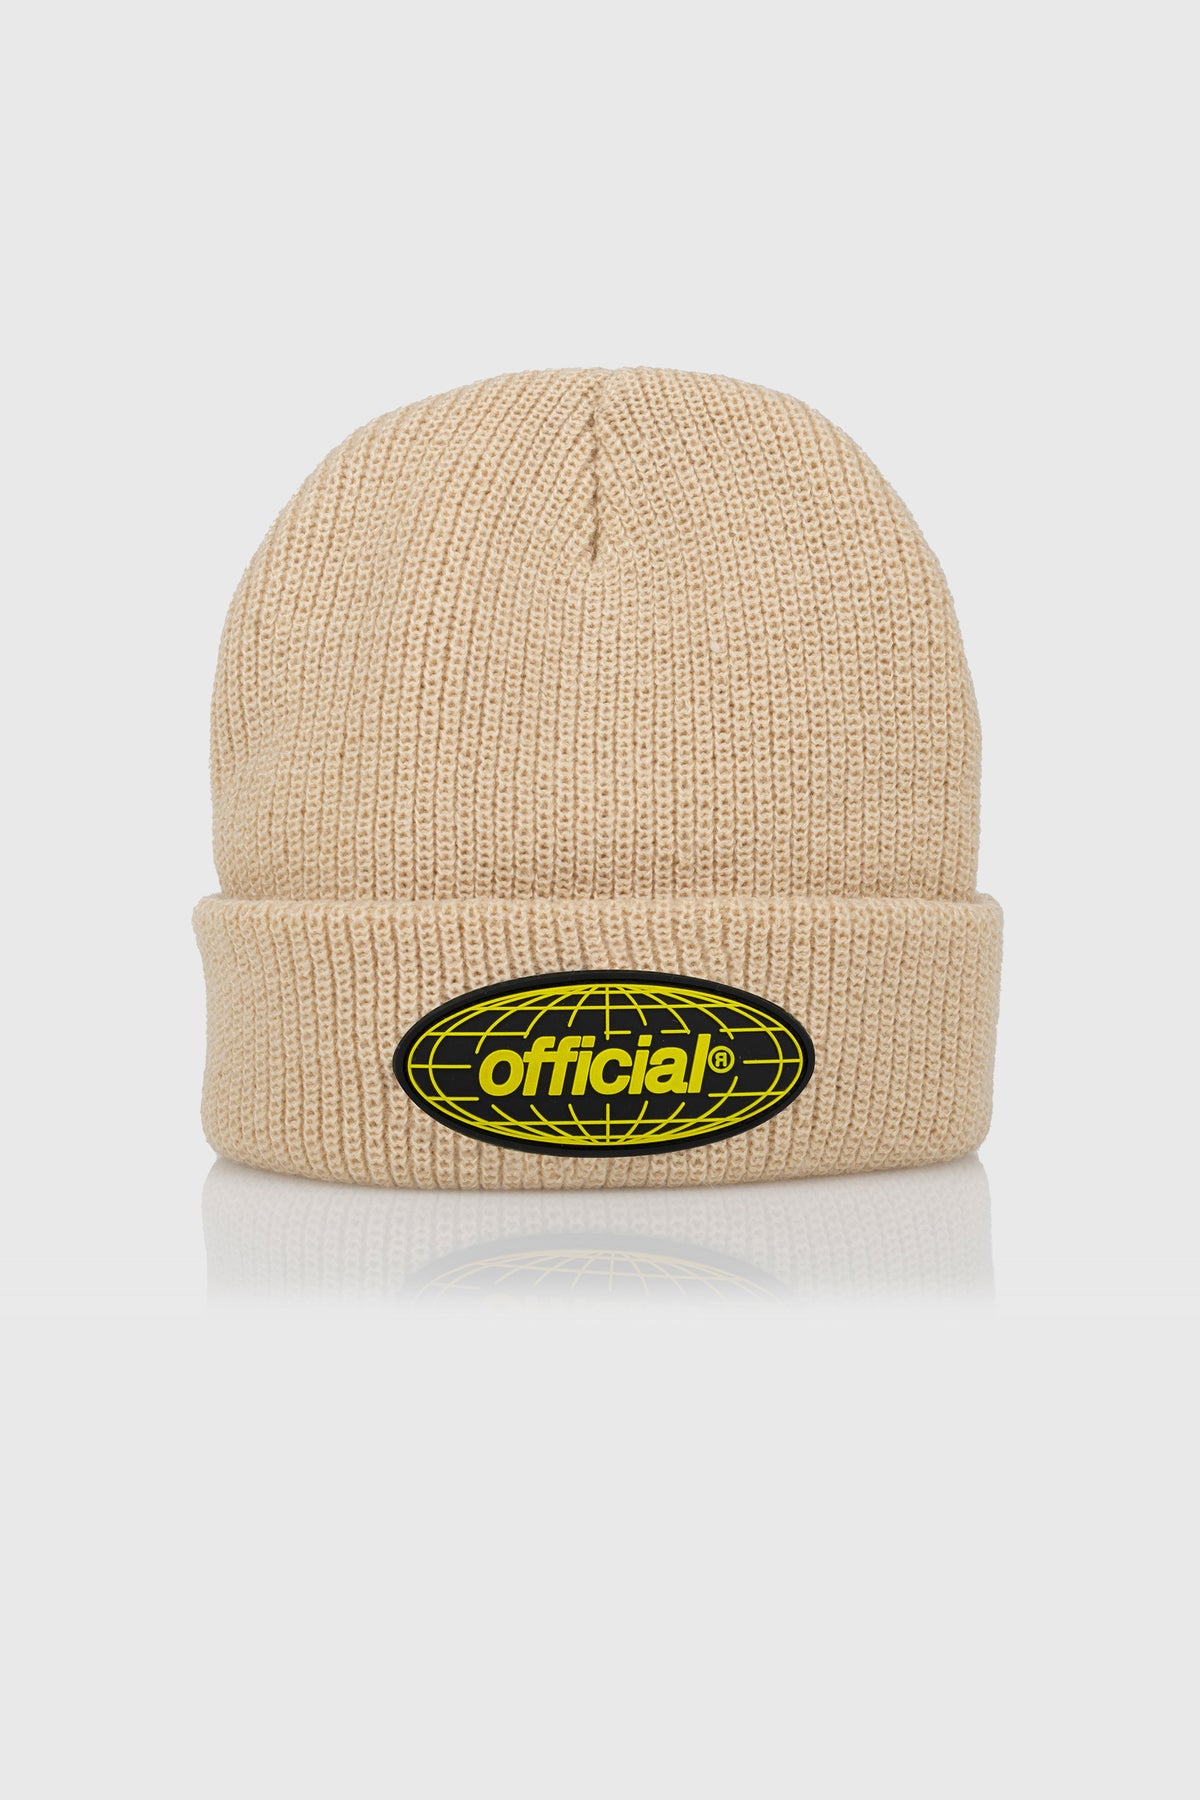 WRLD Takeover Beanie (Beige) – The Official Brand